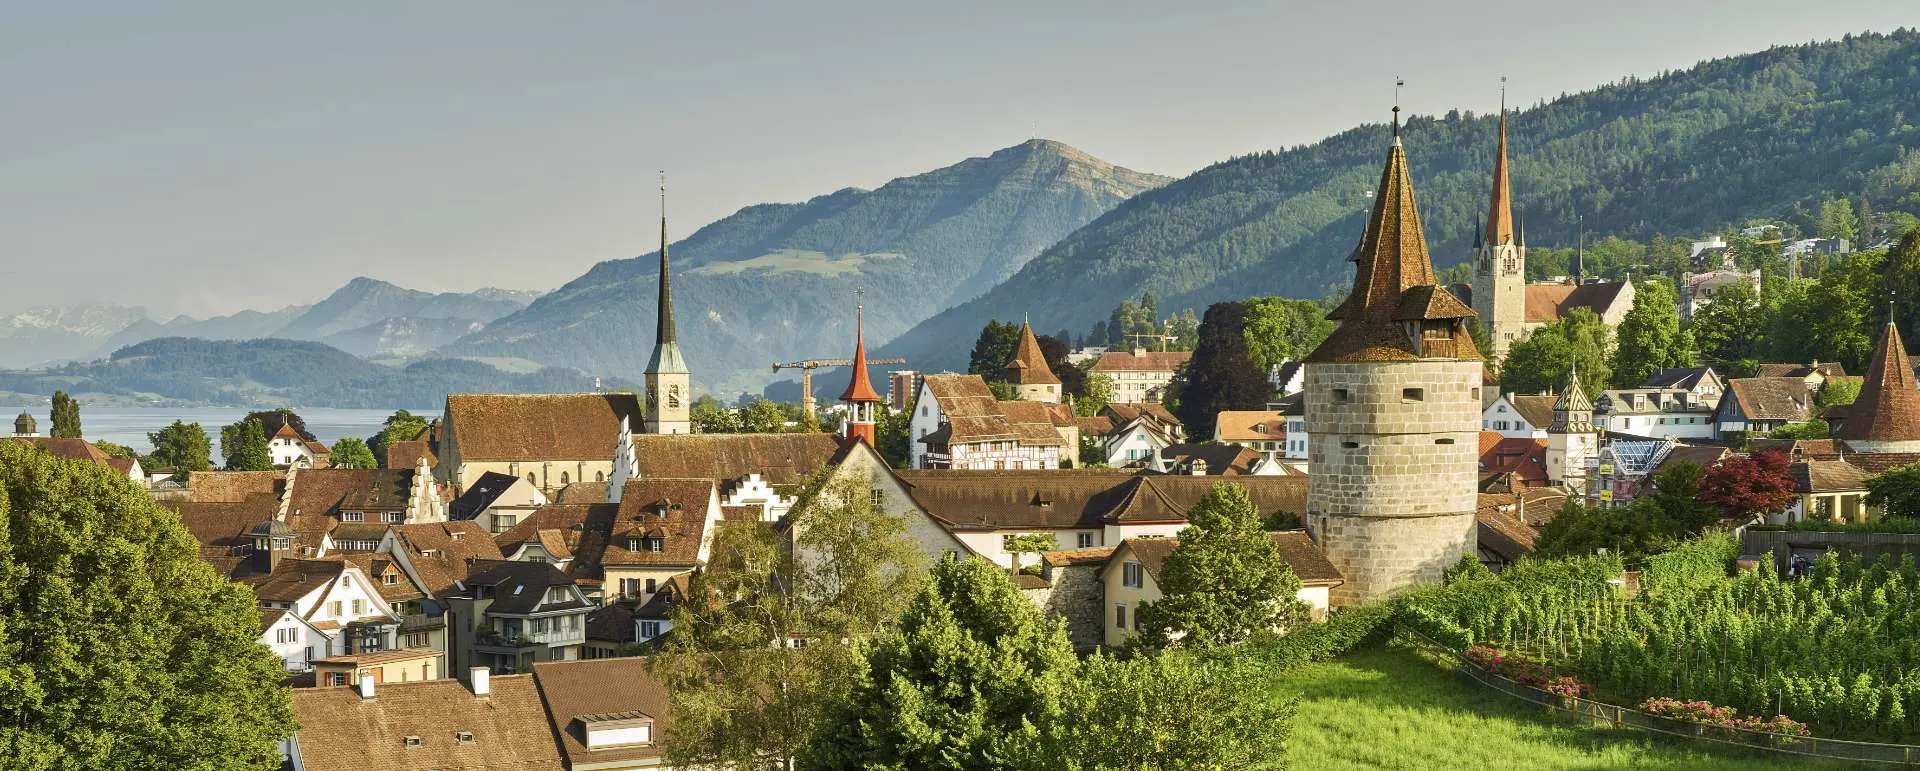 Zug - the destination for classes seeking nature experiences